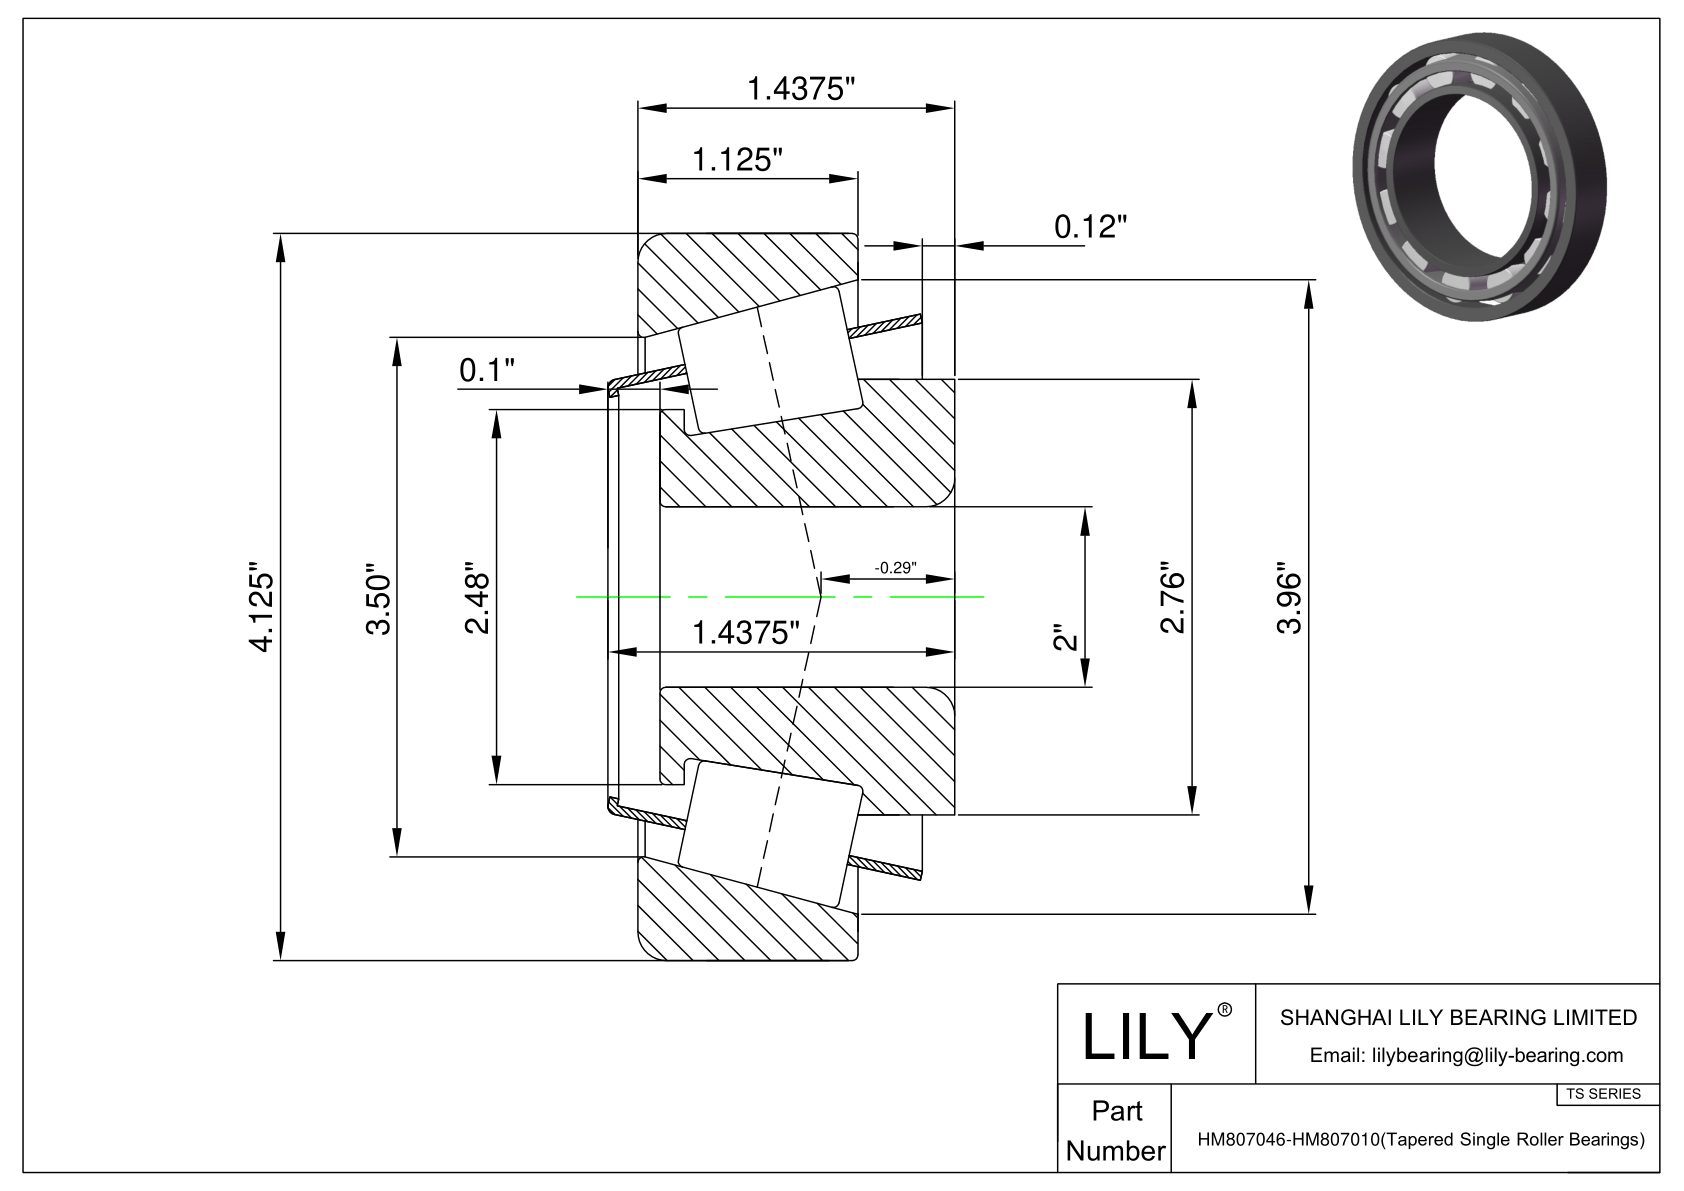 HM807046-HM807010 TS (Tapered Single Roller Bearings) (Imperial) cad drawing